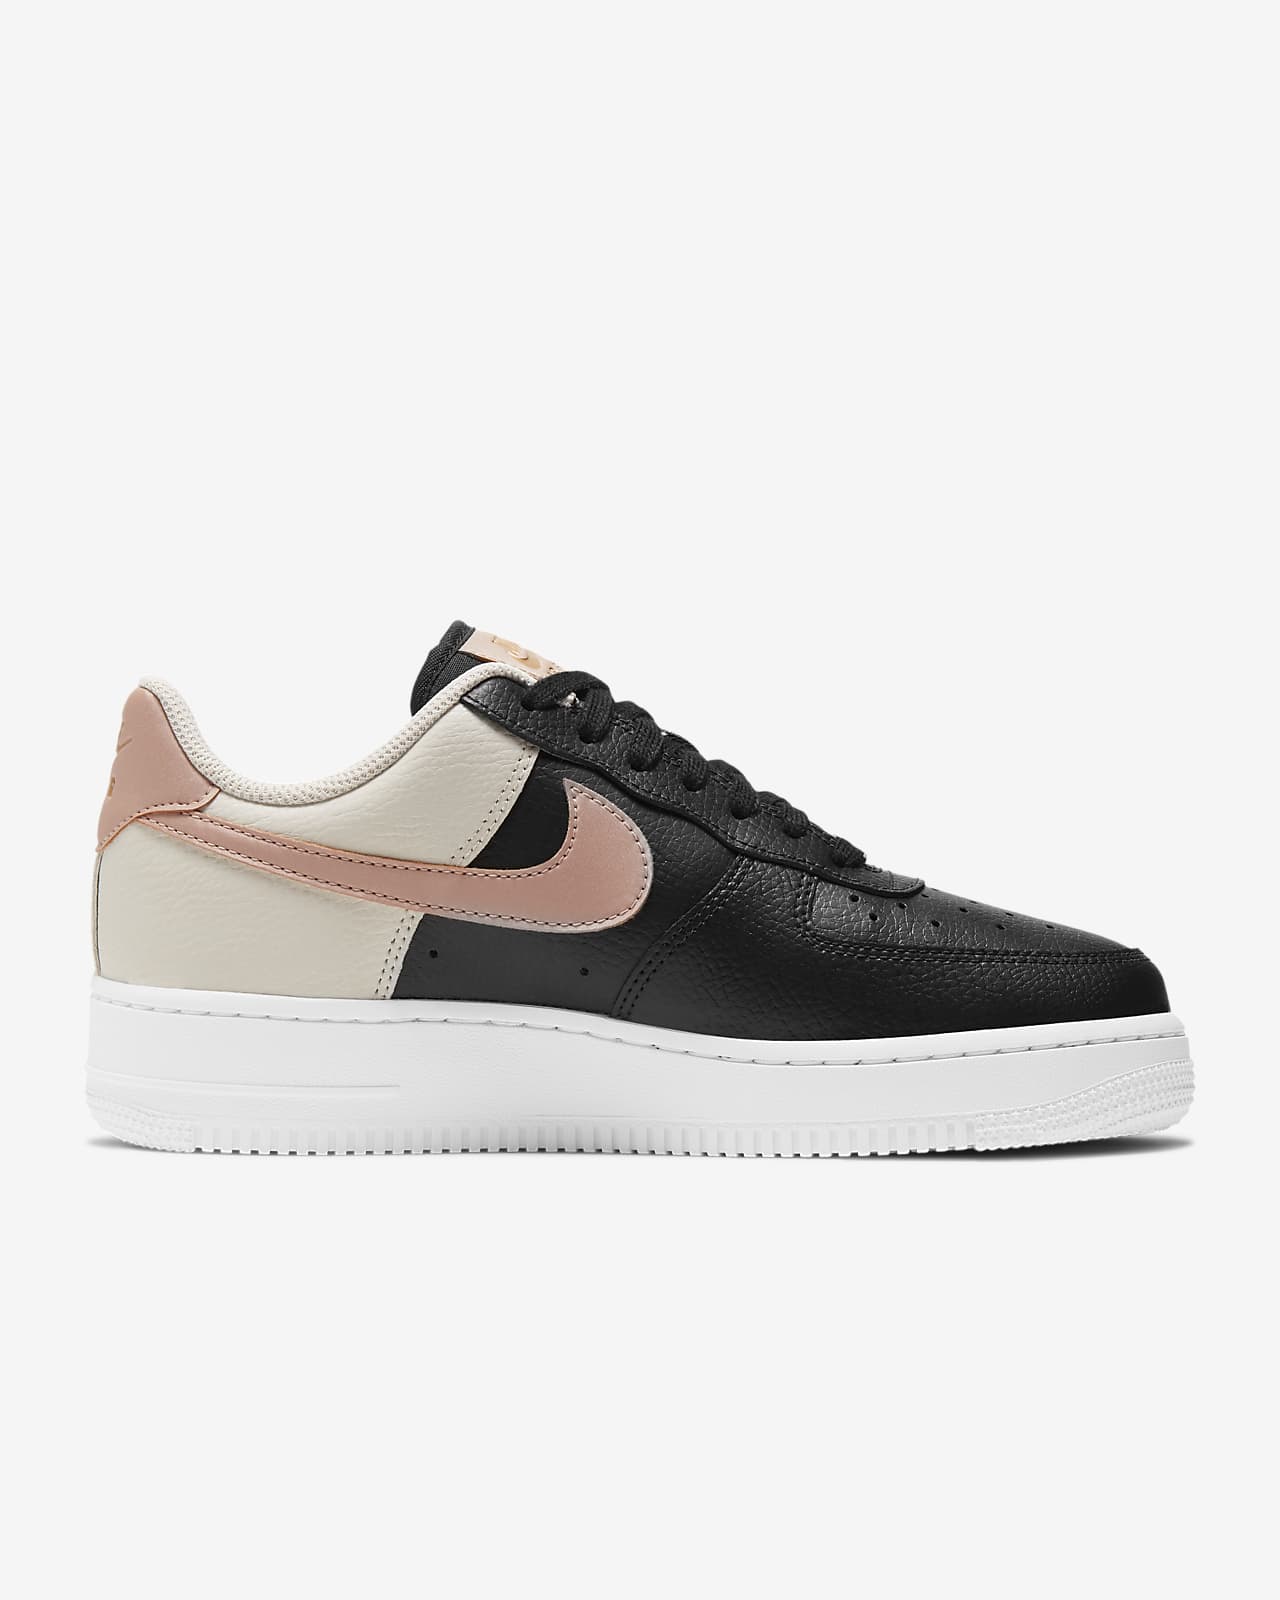 nike air force 1 07 womens size 9.5